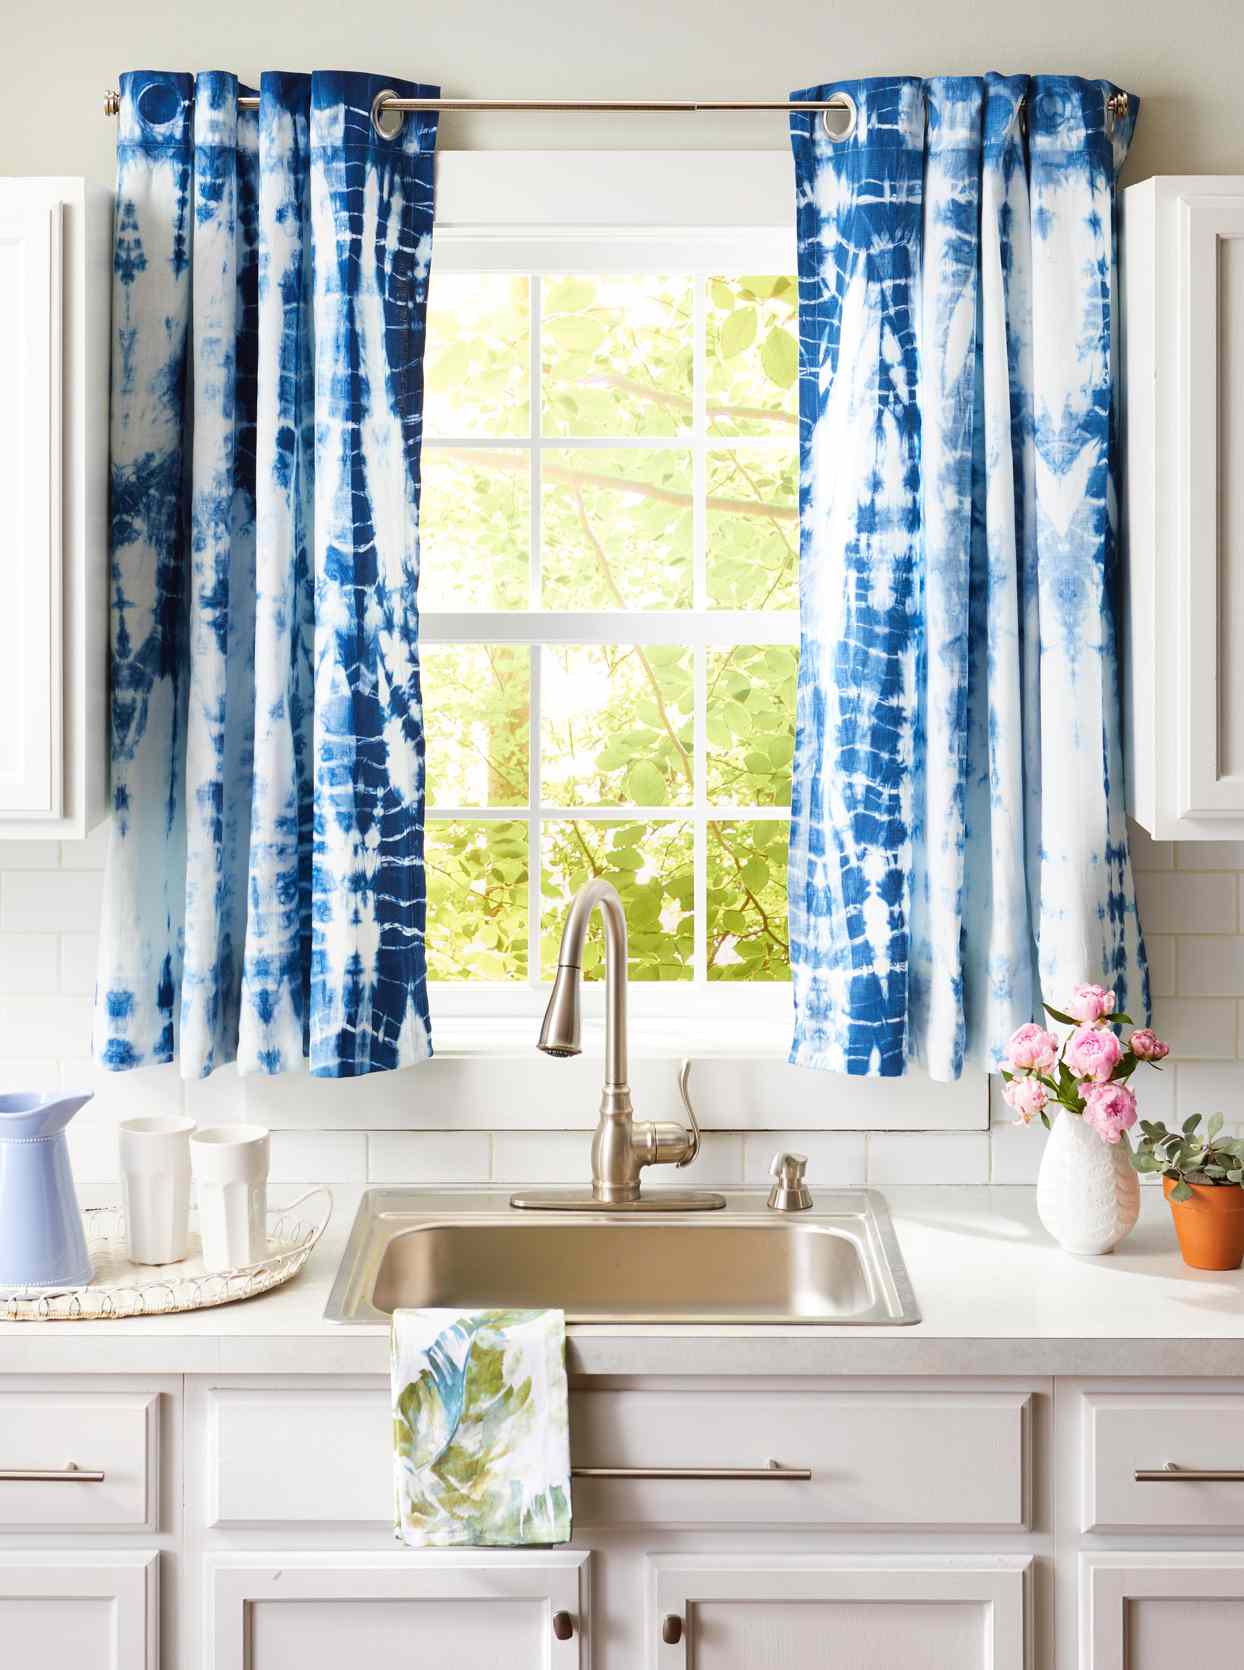 20 Small Kitchen Window Curtains for an Easy Refresh   Better ...